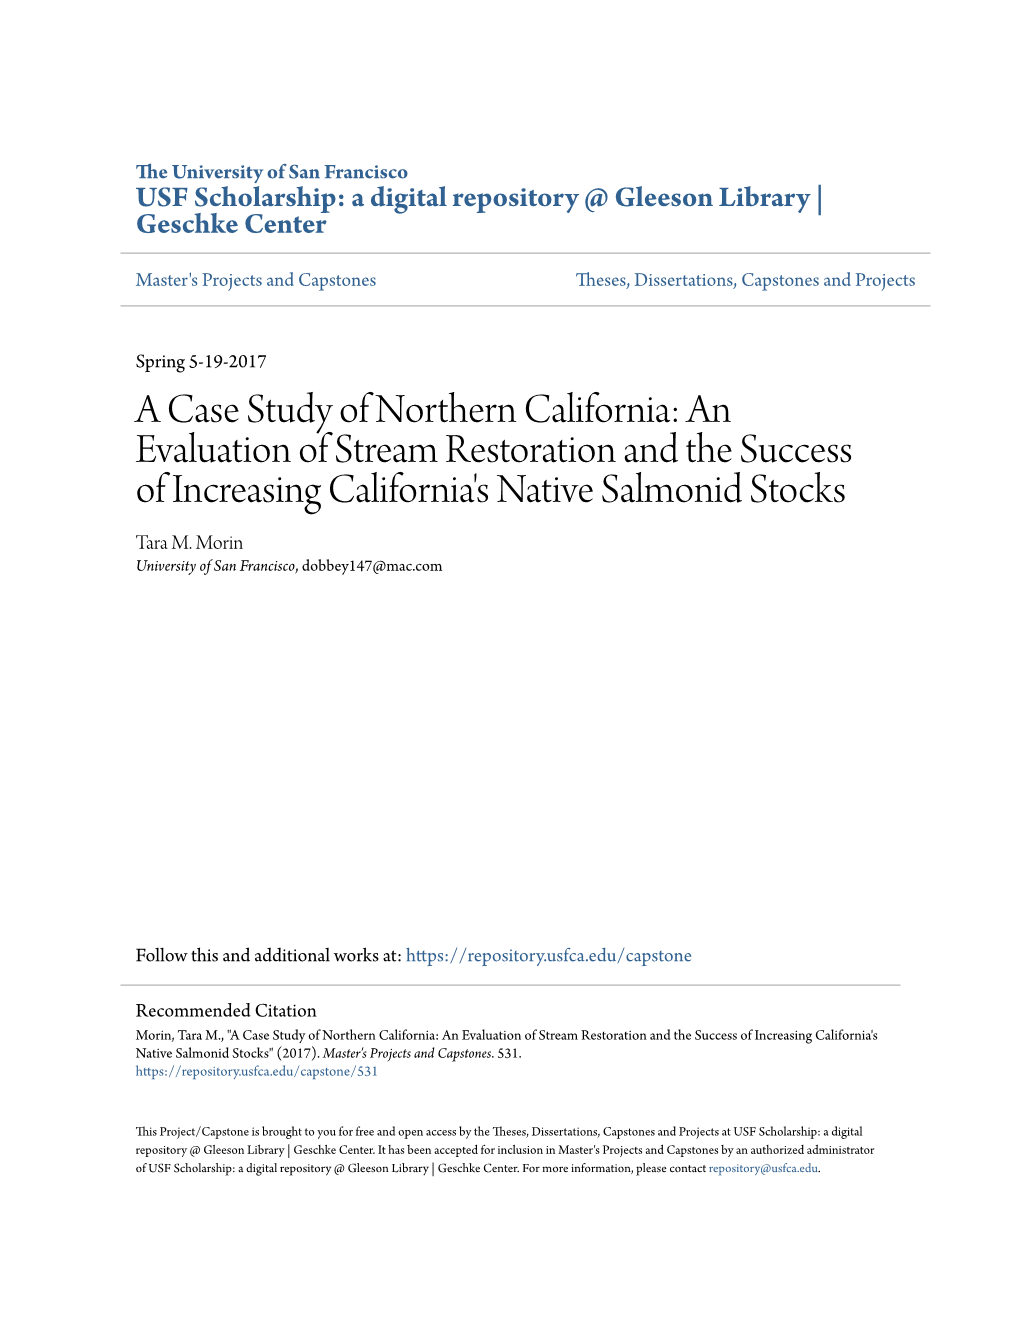 A Case Study of Northern California: an Evaluation of Stream Restoration and the Success of Increasing California's Native Salmonid Stocks Tara M